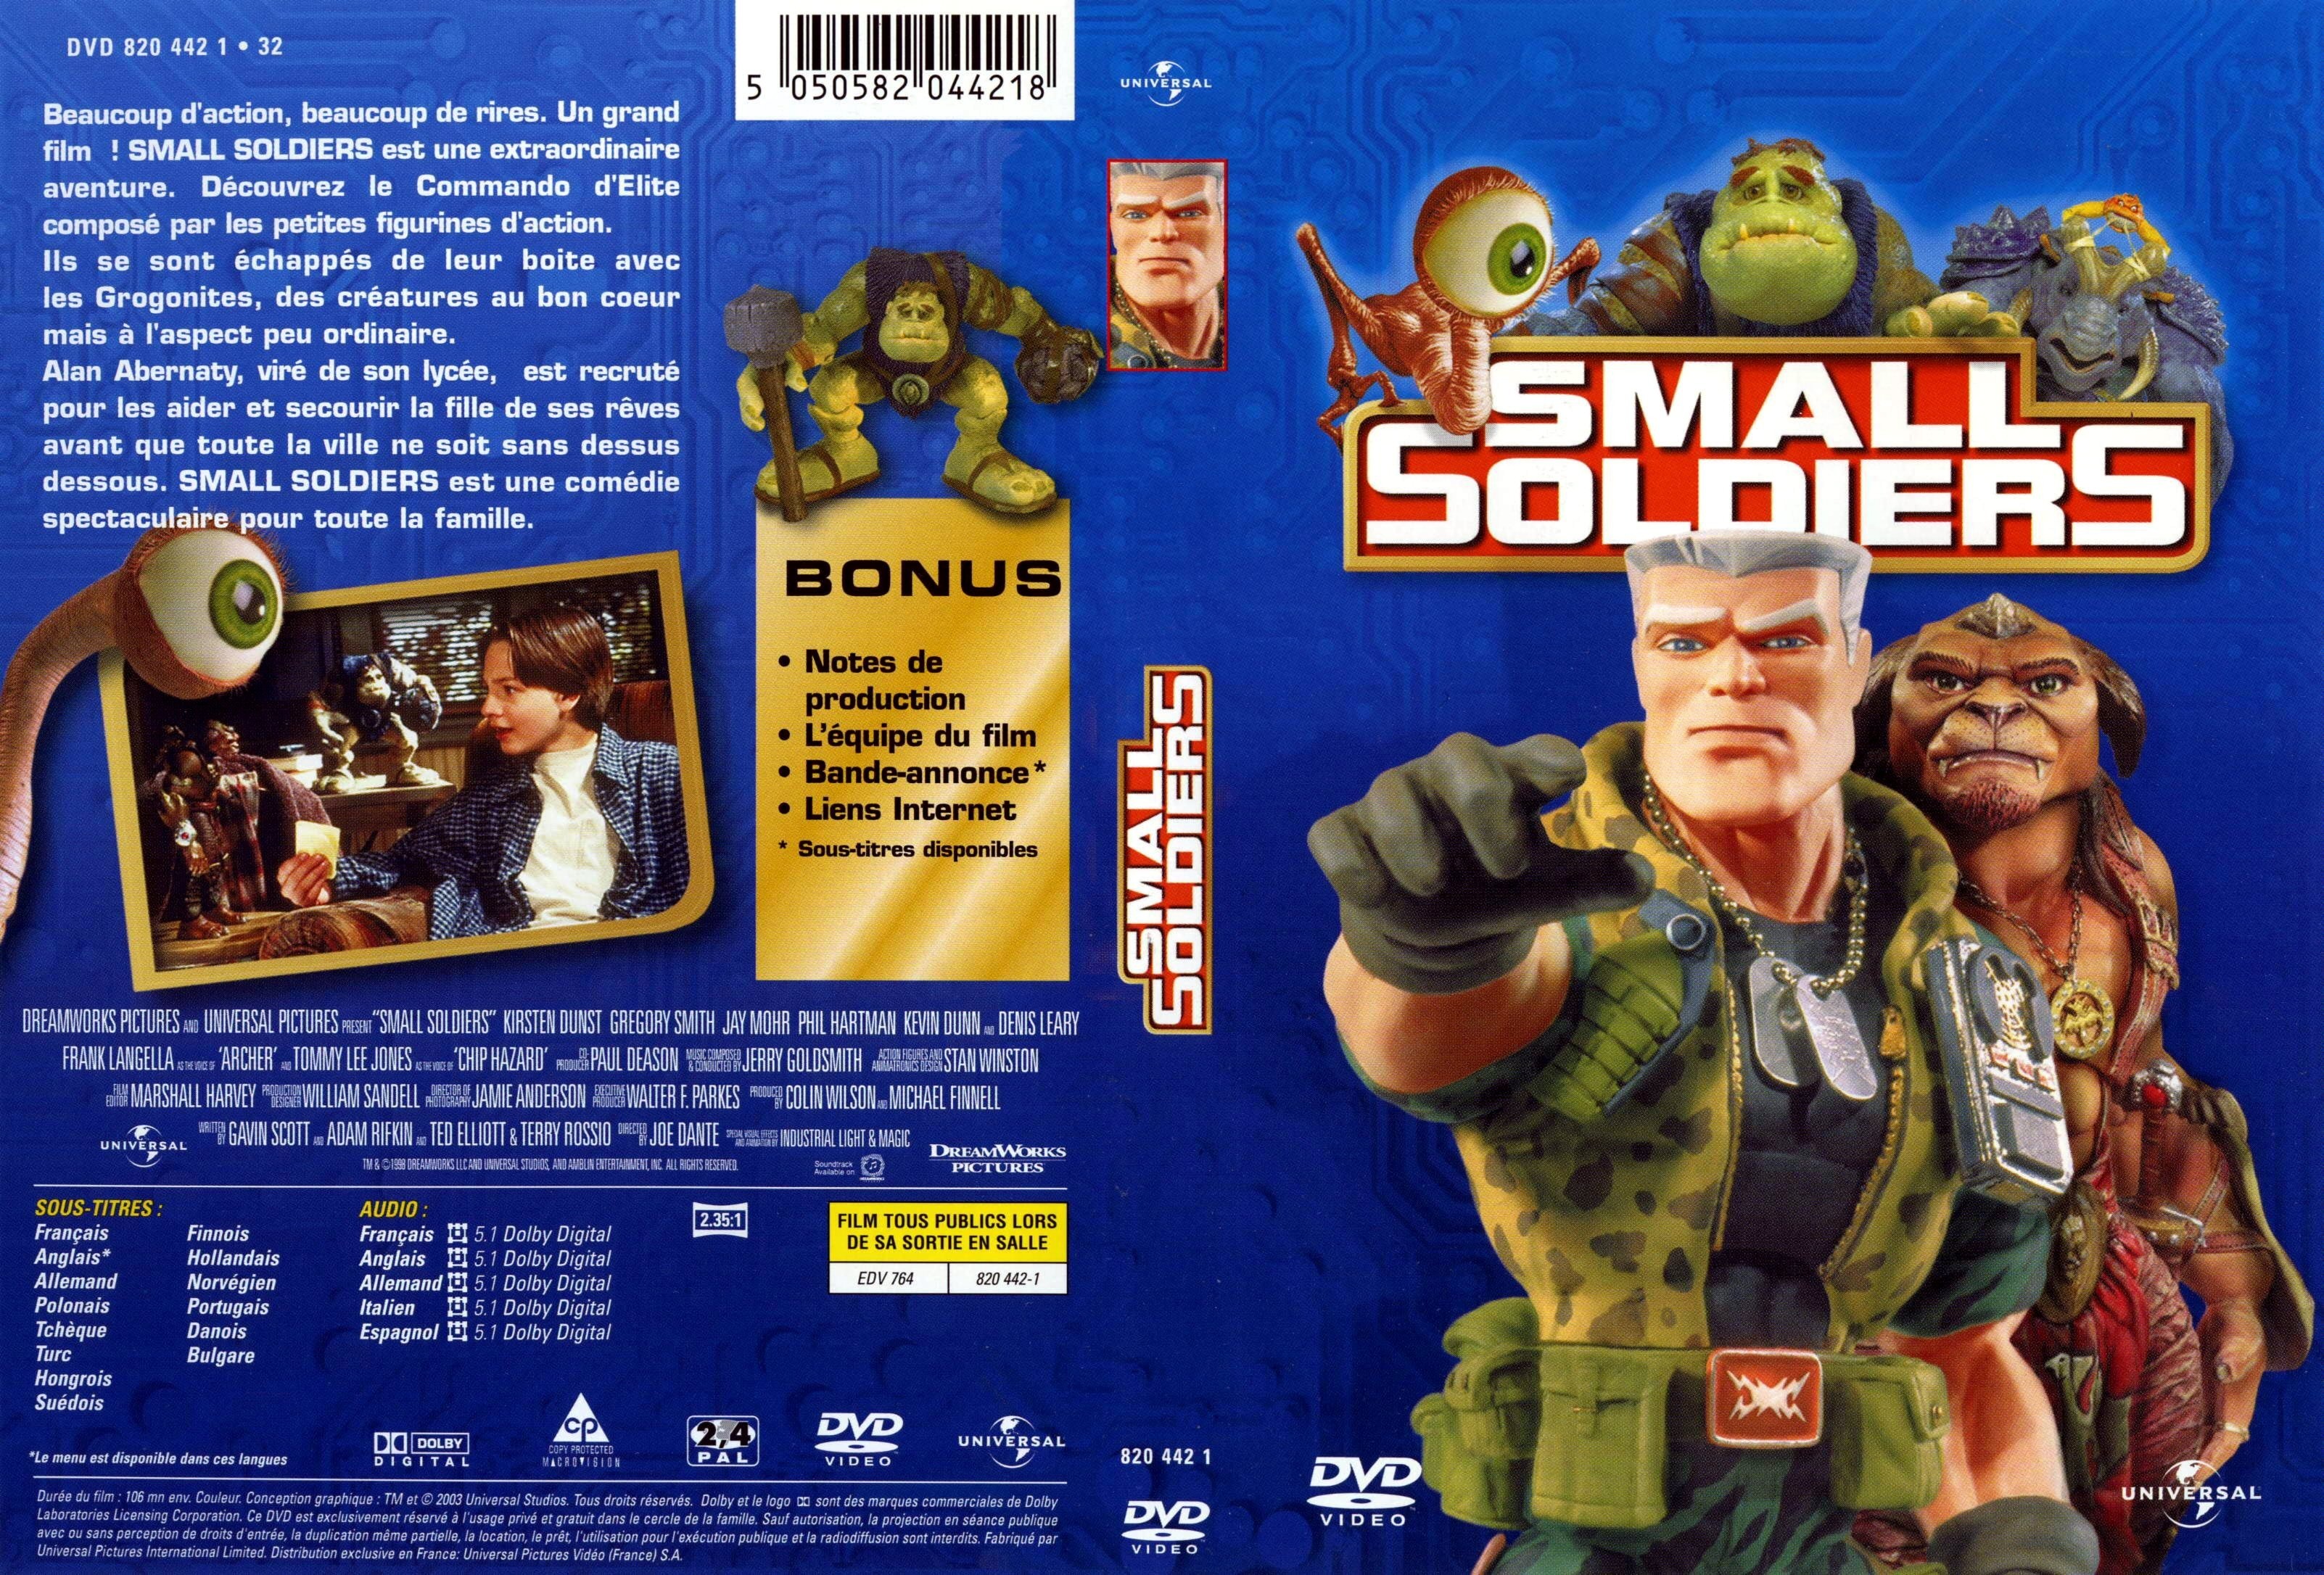 Jaquette DVD Small soldiers